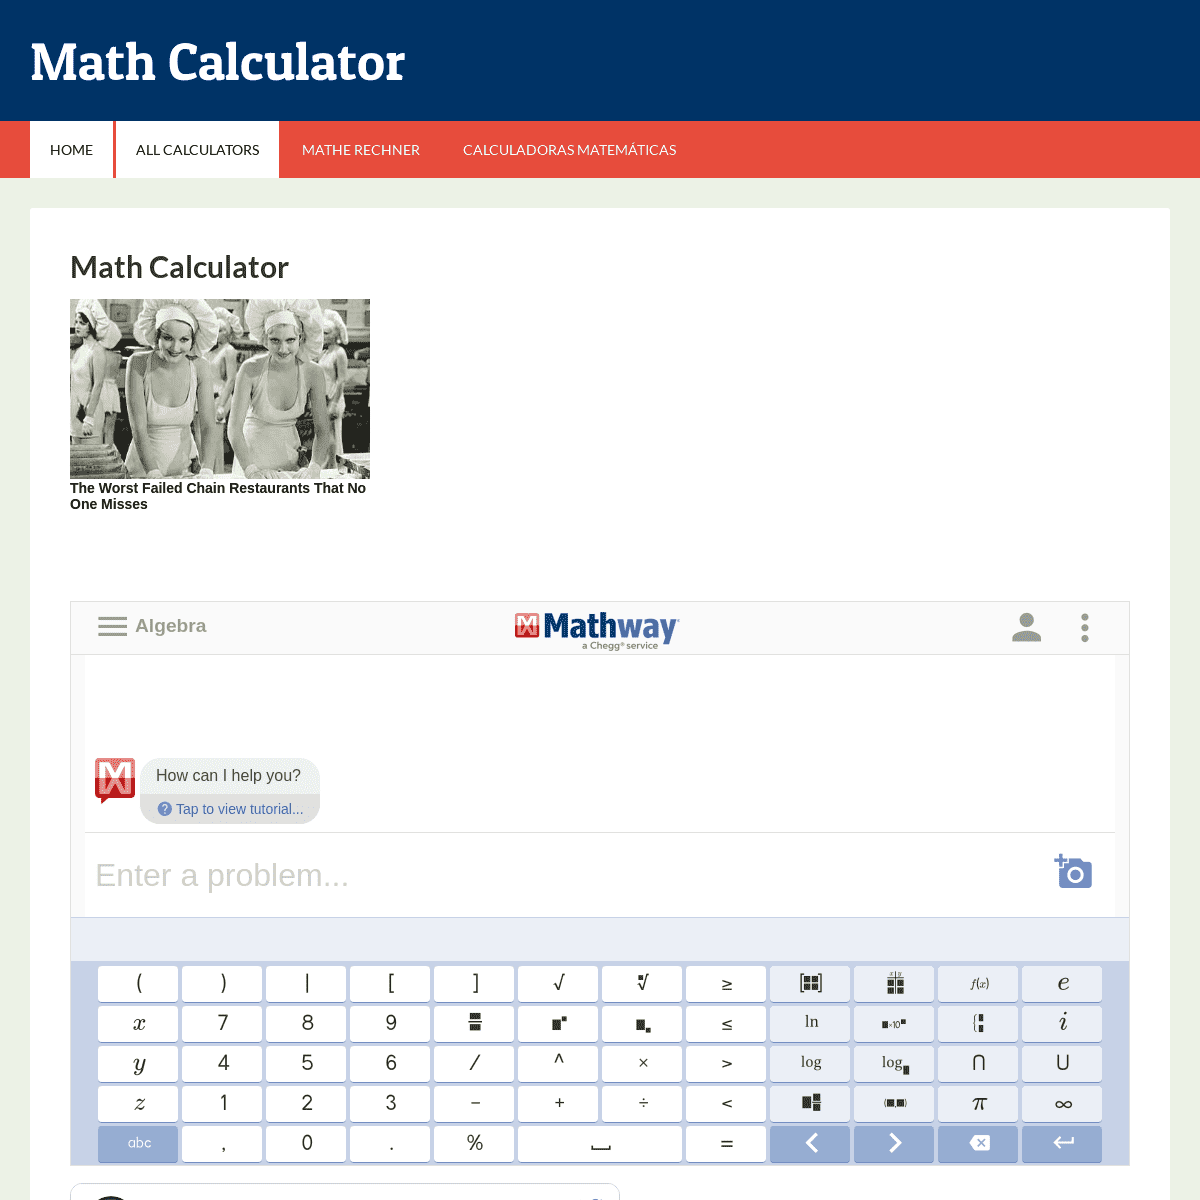 A complete backup of https://mathcalculator.org